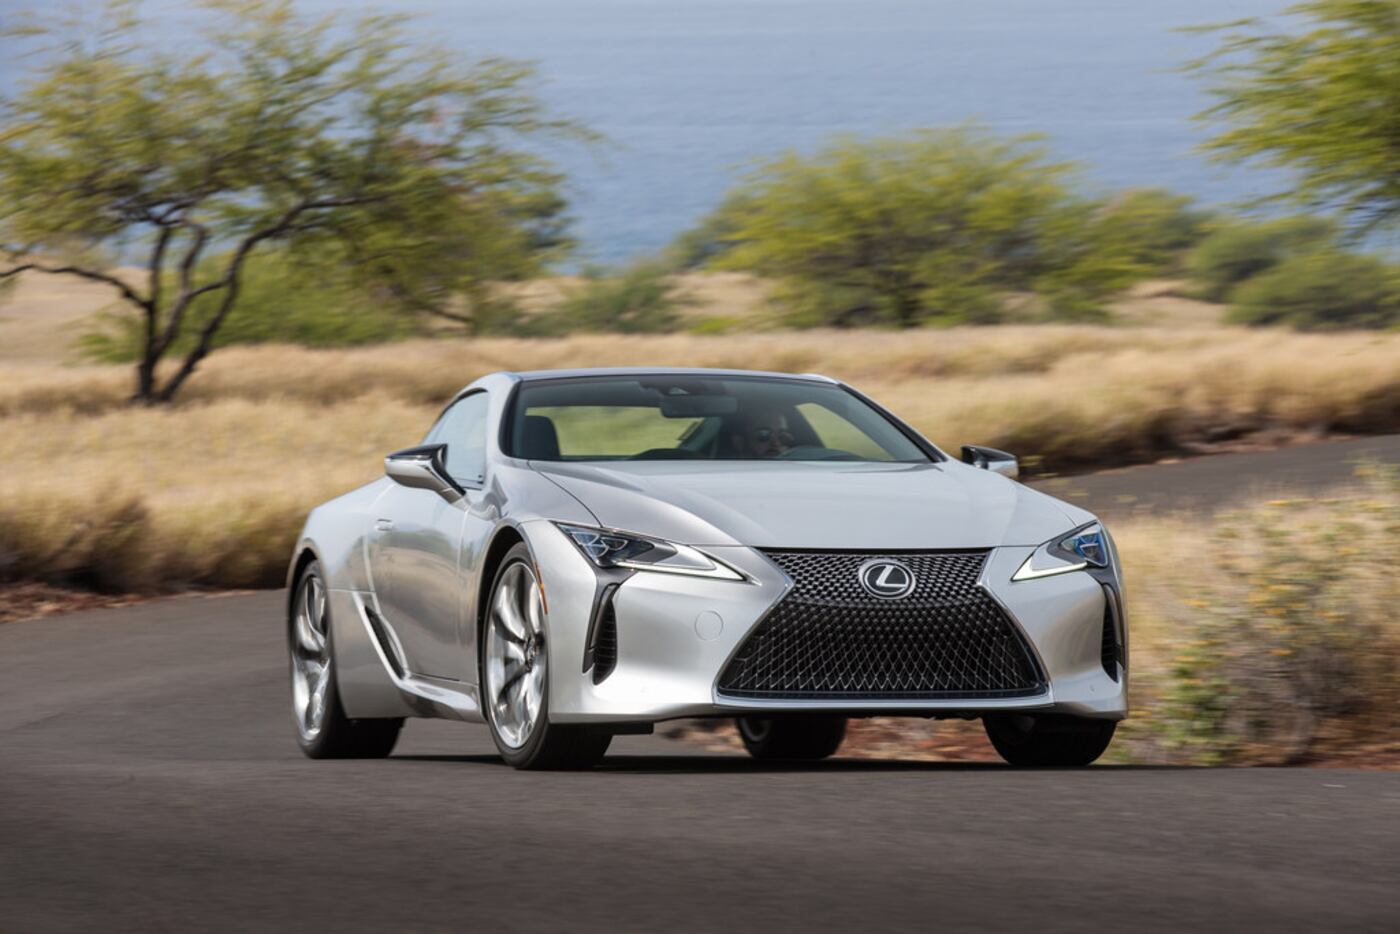 The 2018 Lexus LC 500 coupe starts at $92,000.